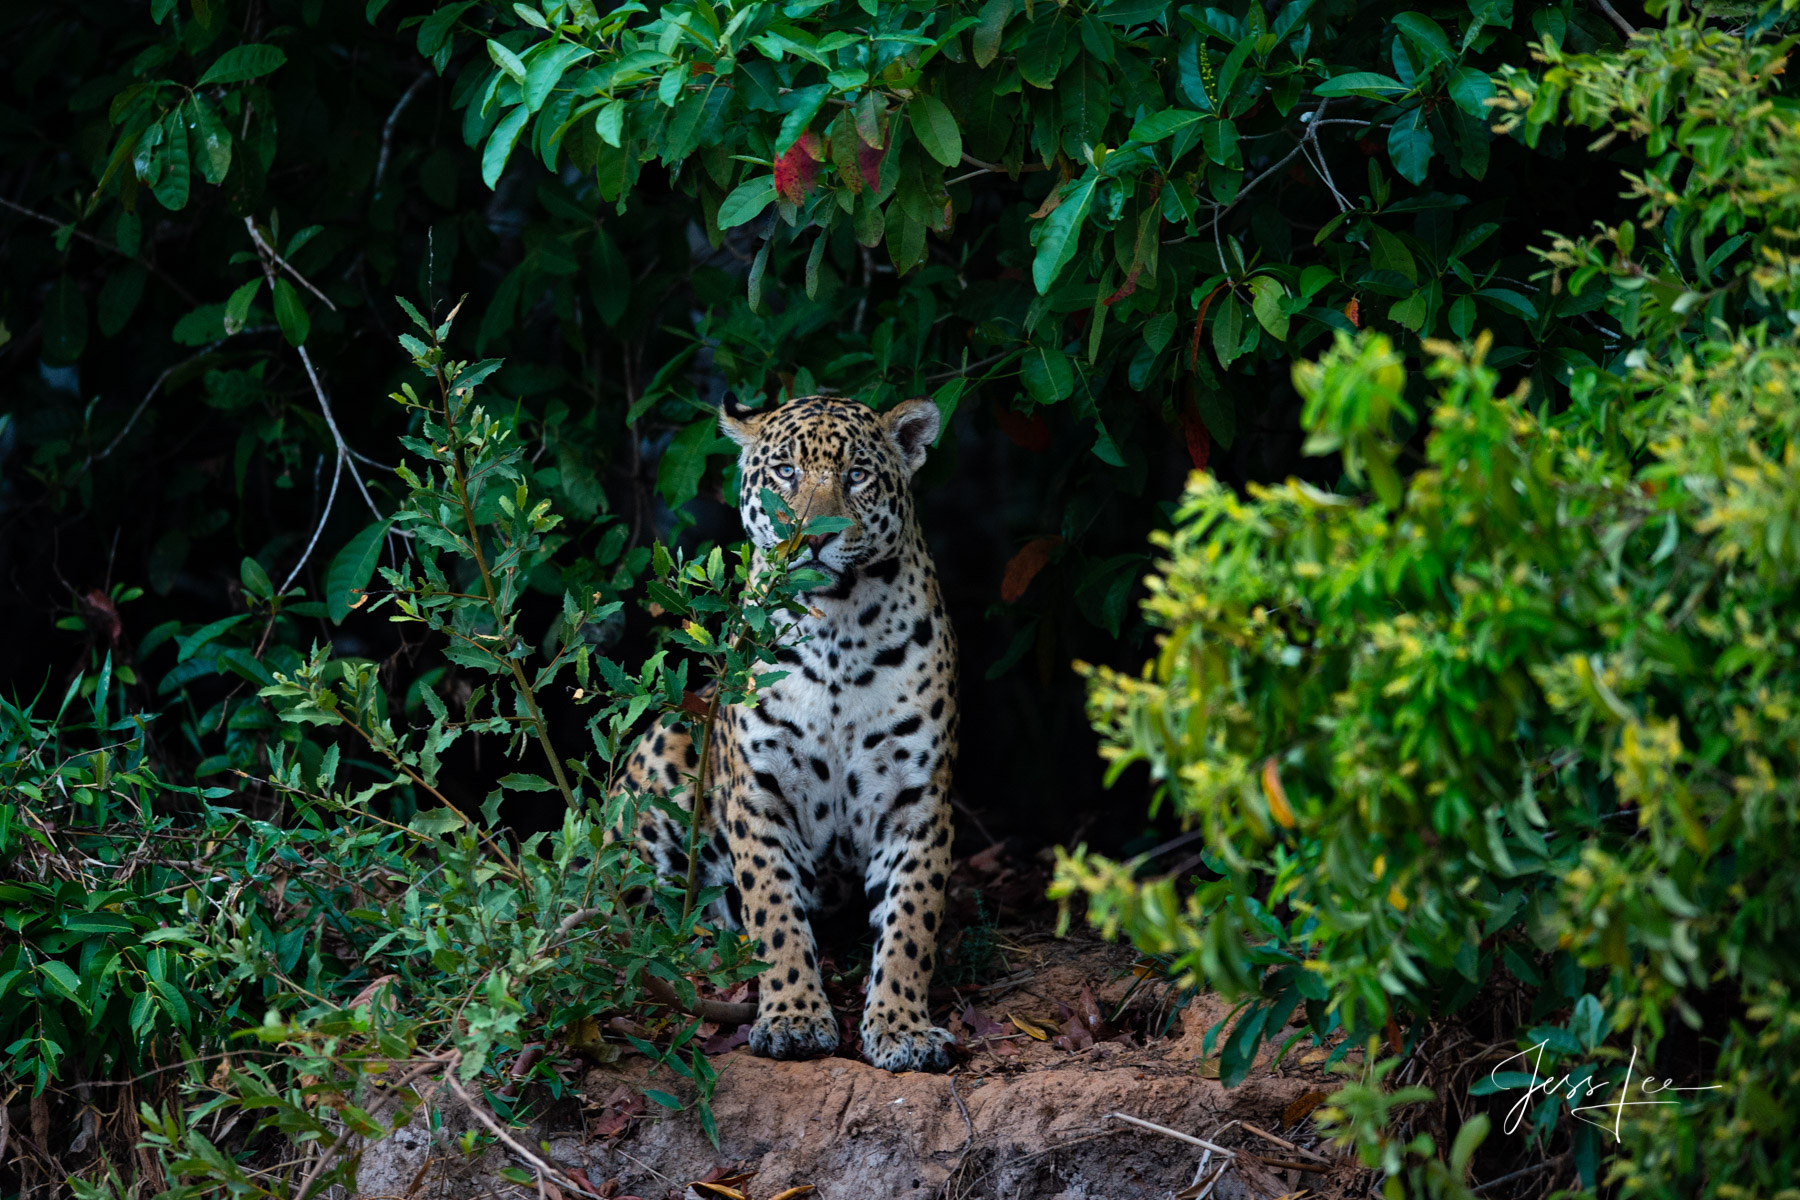 Fine art Jaguar on the edge of the jungle print limited edition of 300 luxury prints by Jess Lee. All photographs copyright ©...